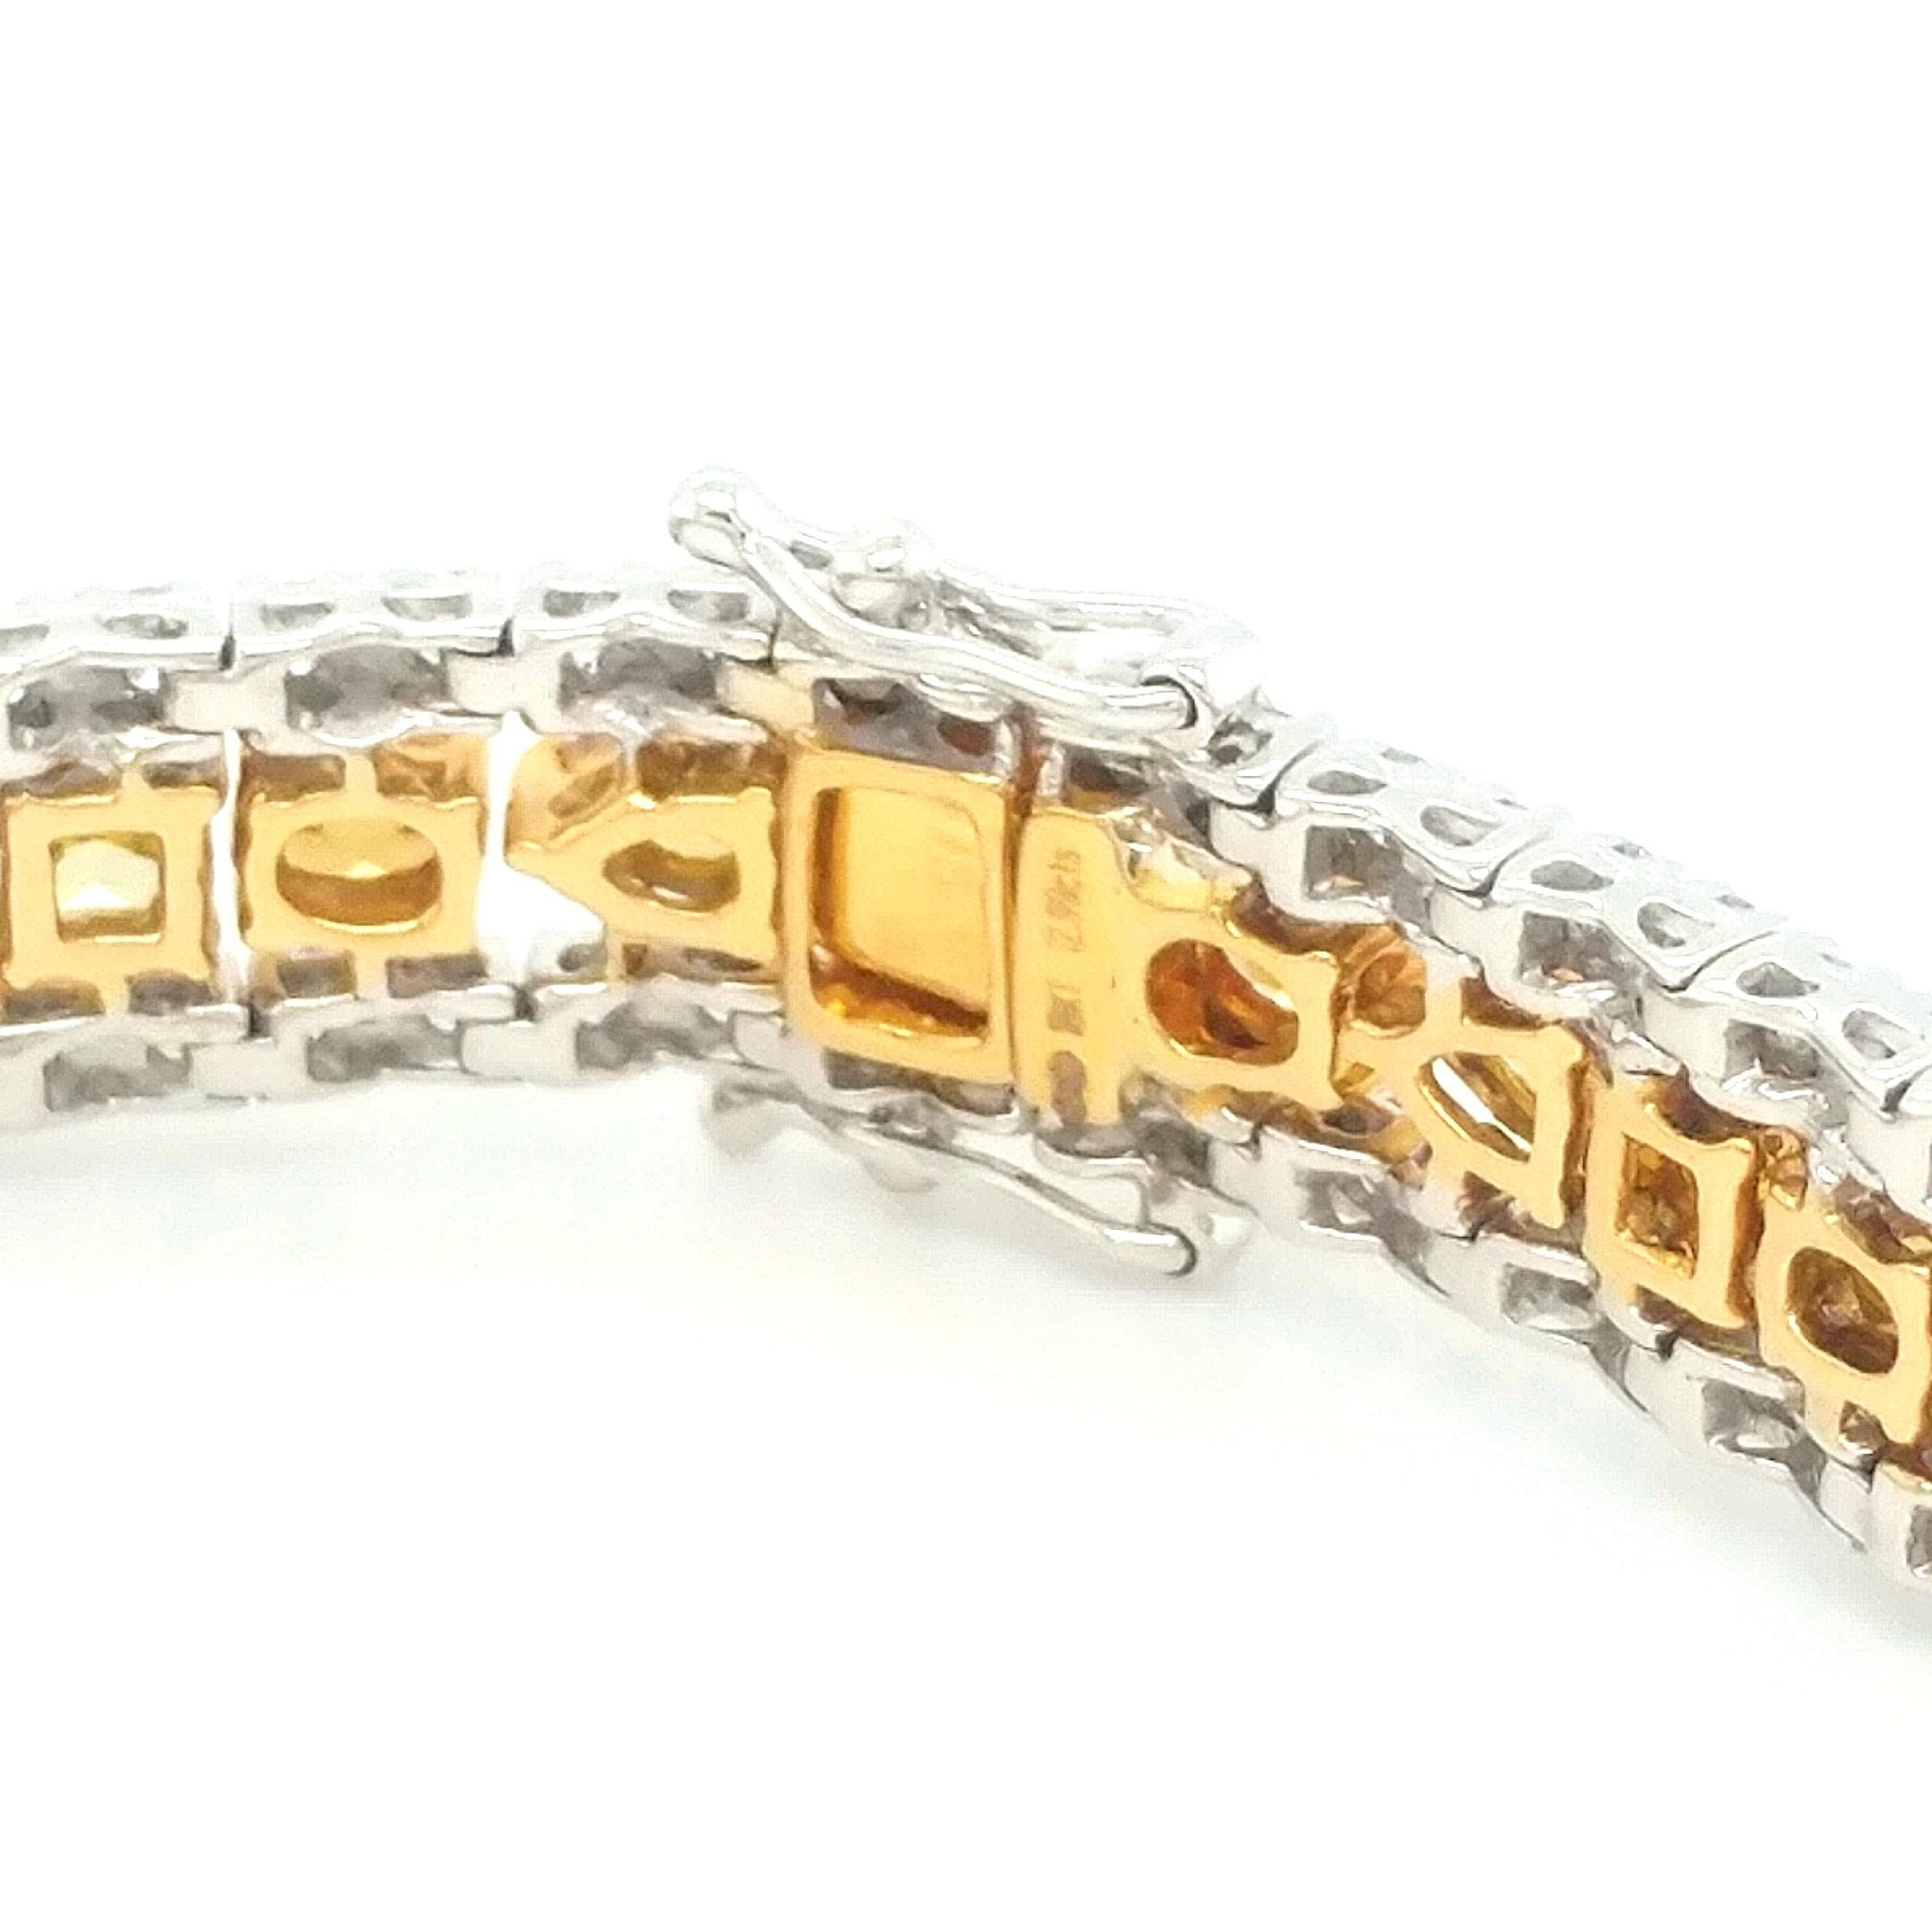 A beautiful 18kt white and yellow gold bracelet featuring 9.60 Carats of Cushion Modified Brilliant, Oval Brilliant & Pear Modified Brilliant Color-Enhanced Brown, Yellow & Orange Diamonds & 3.40 Carats of Round Brilliant Diamonds. Some of the fancy